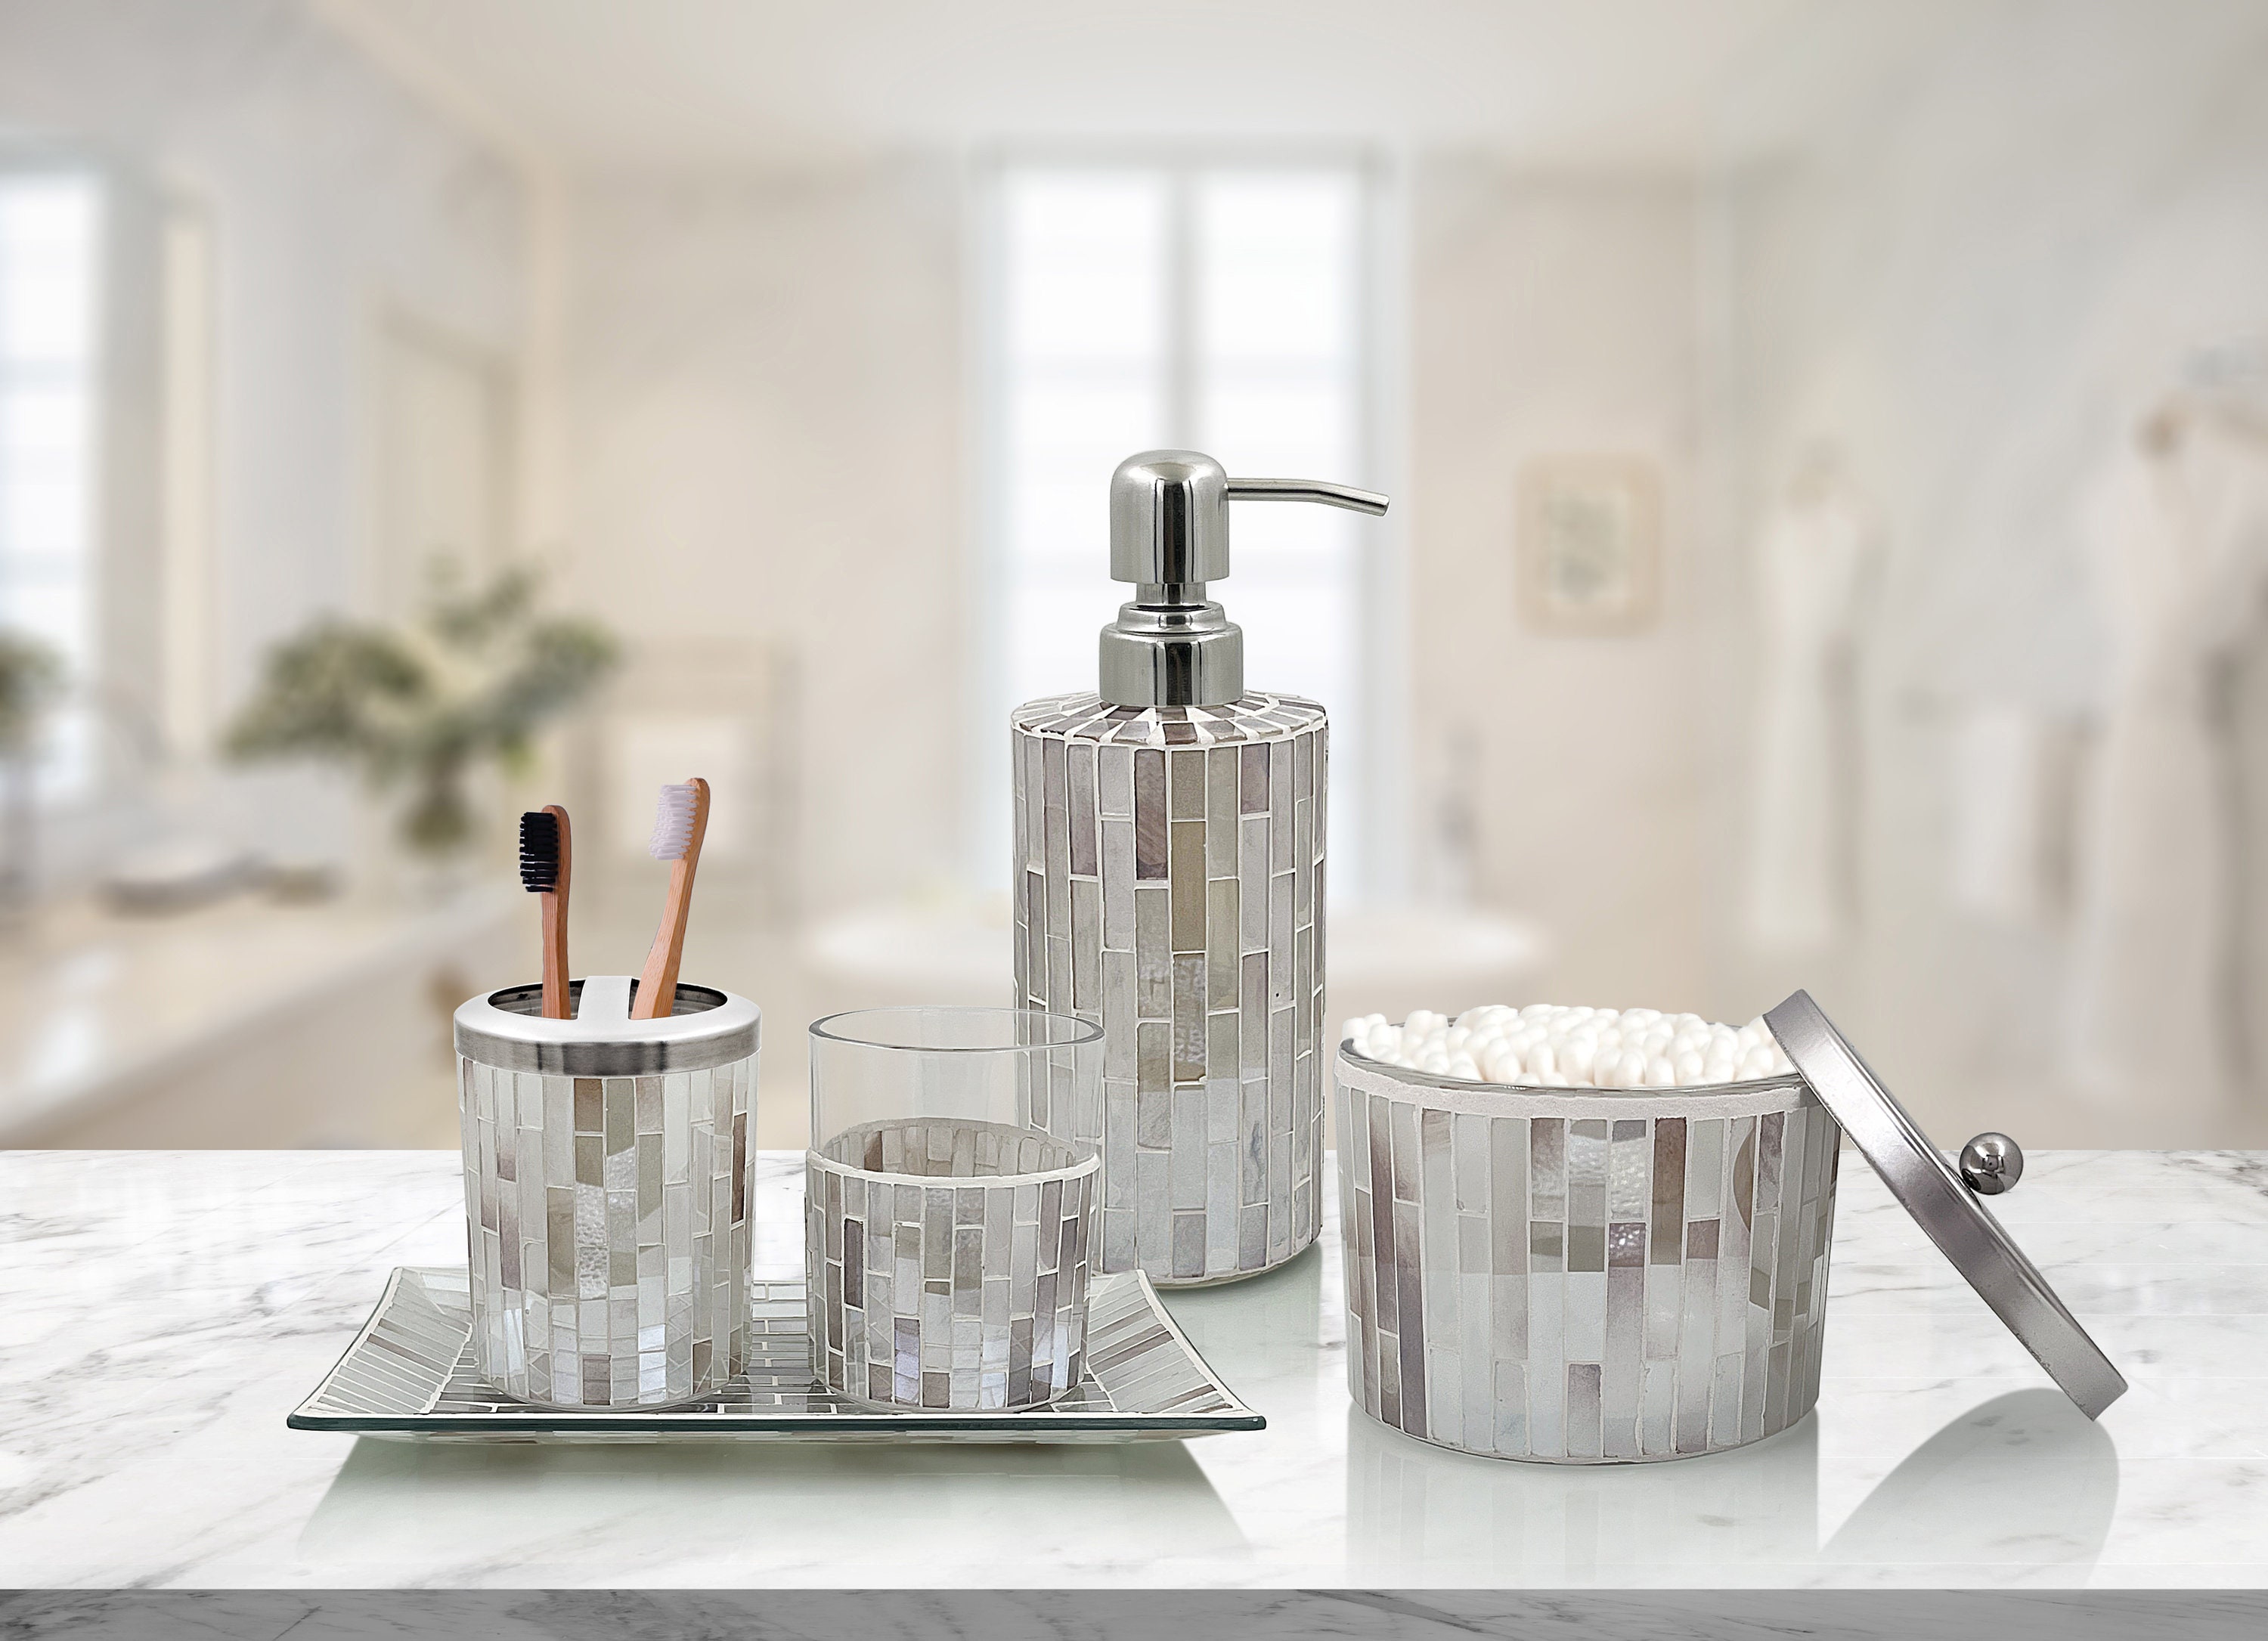  Creative Scents Silver Bathroom Accessories Set Complete - 6  Piece Mosaic Glass Bathroom Accessory Set Includes: Trash Can, Tissue Box  Cover, Soap Dispenser, Toothbrush Holder, Soap Dish & Tumbler : Home